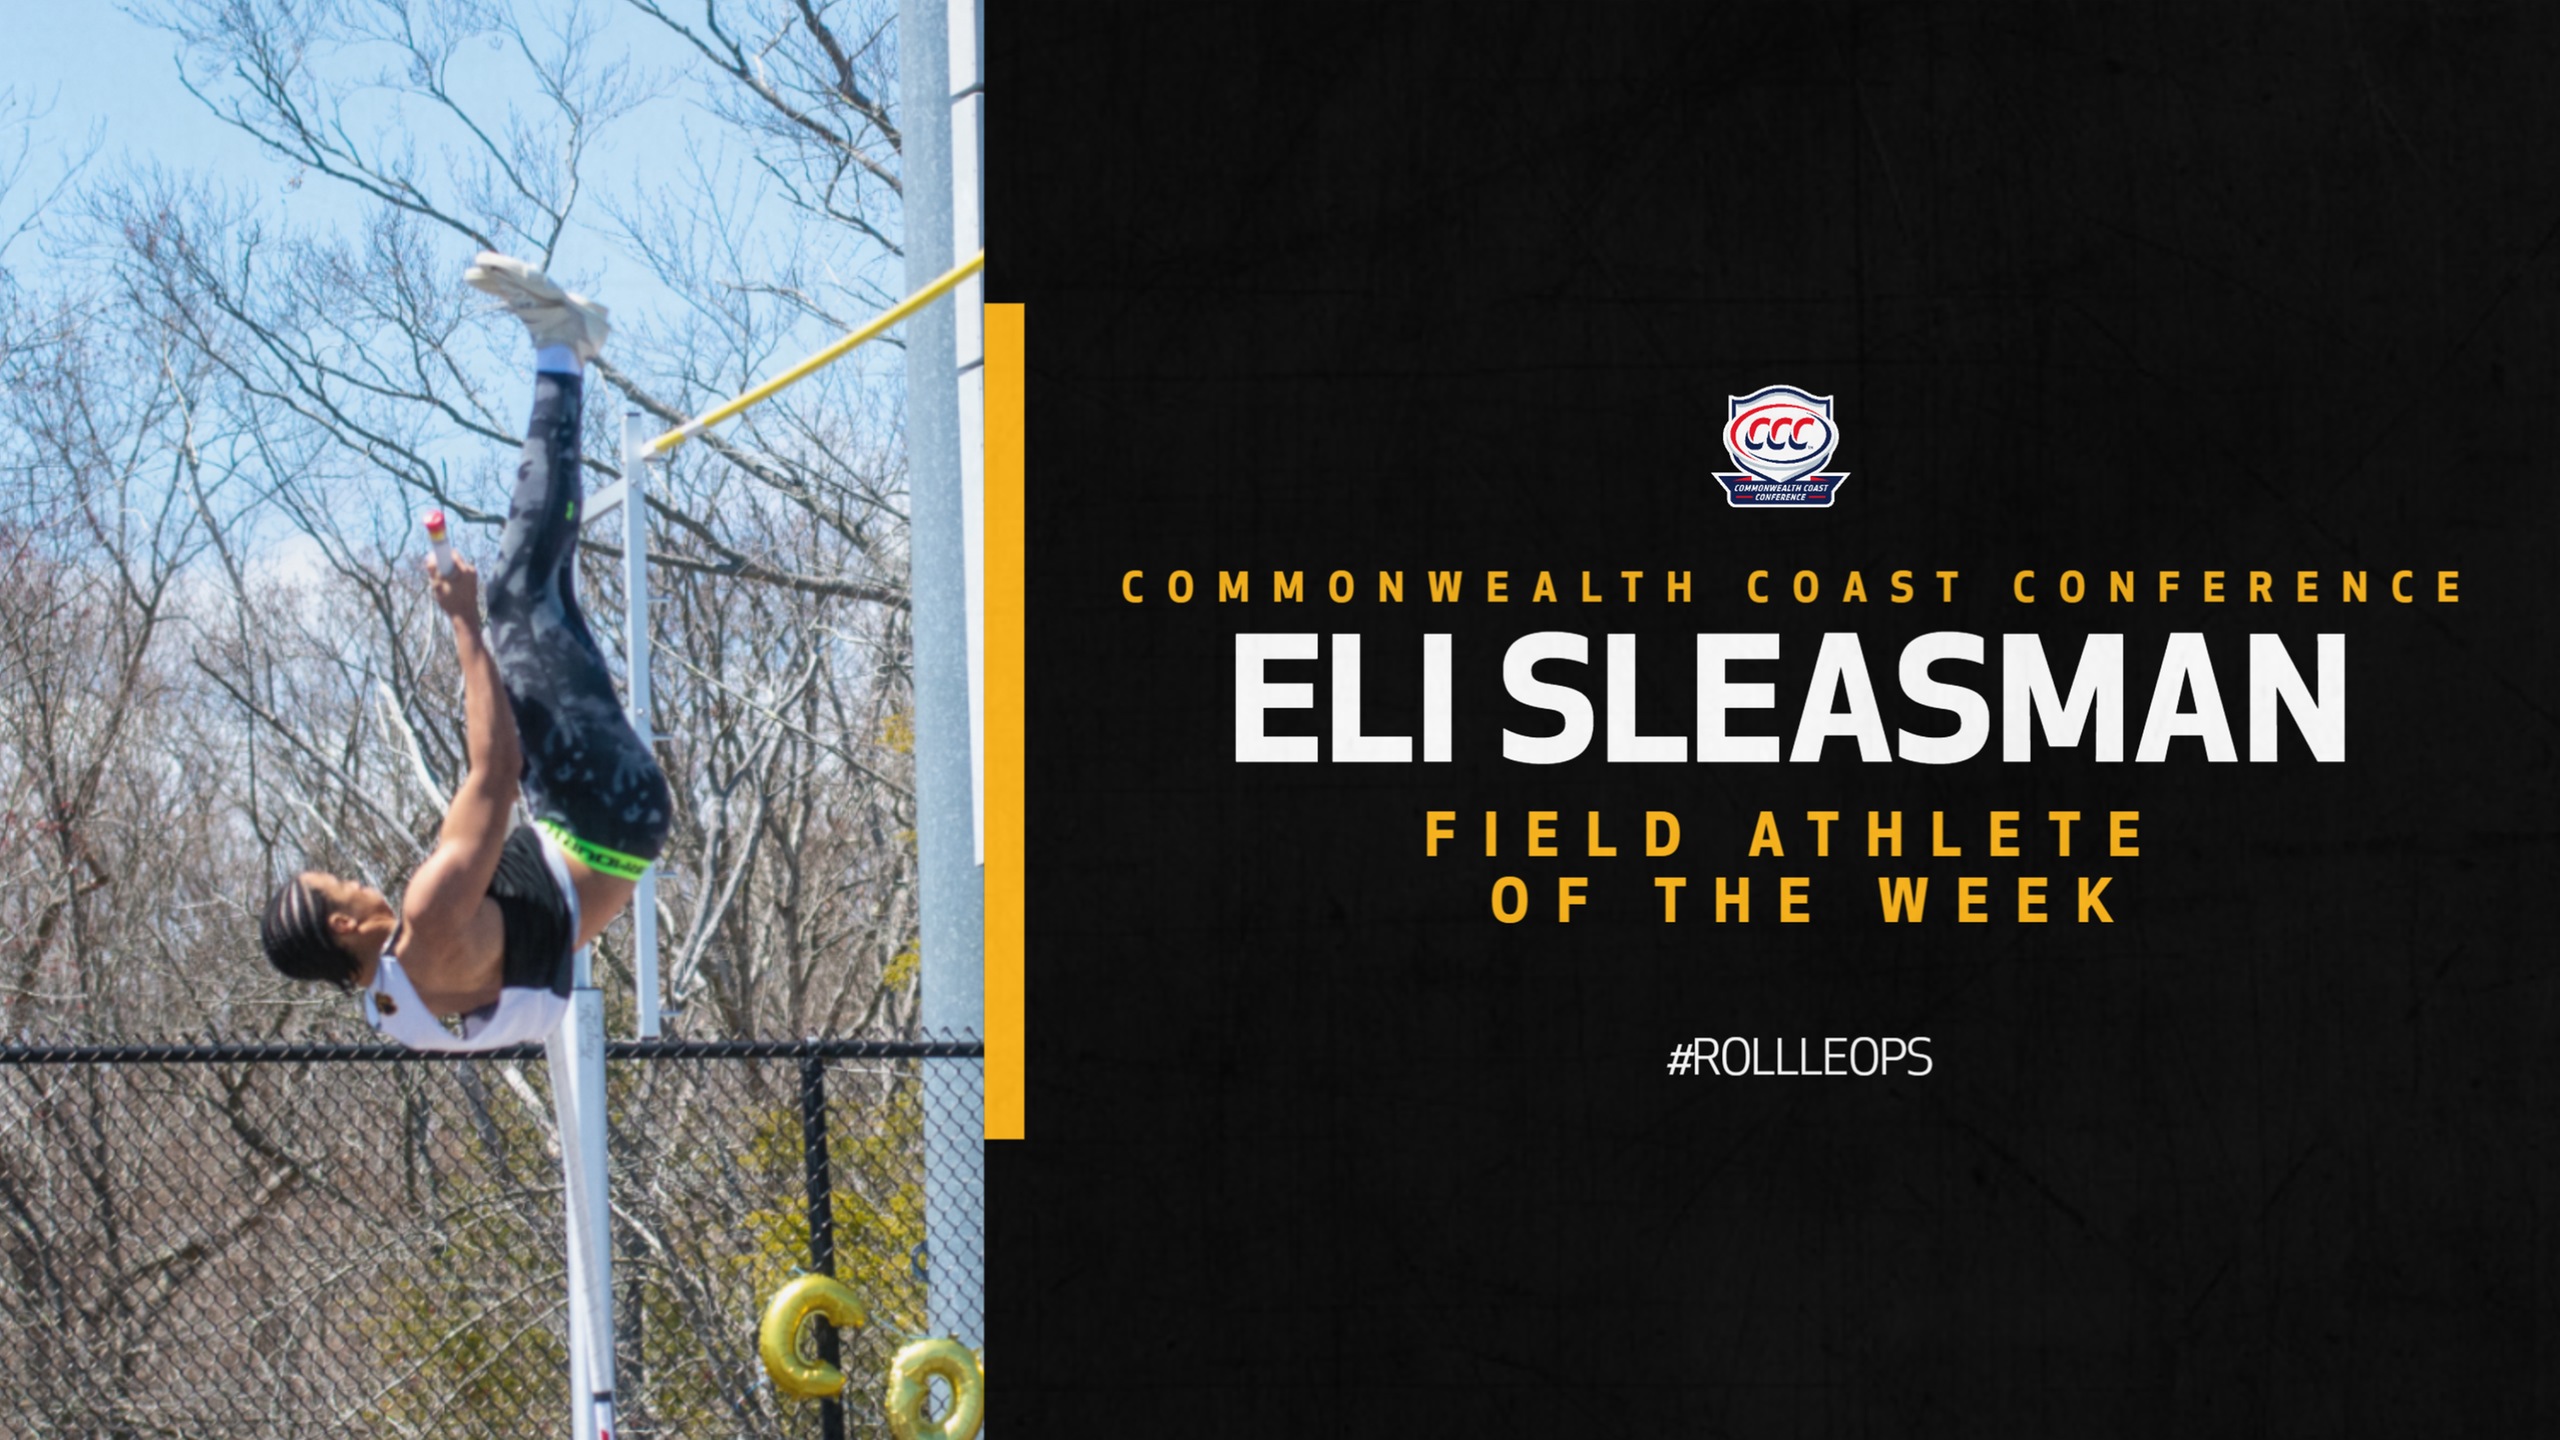 Sleasman Takes Home CCC Field Athlete of the Week Honors